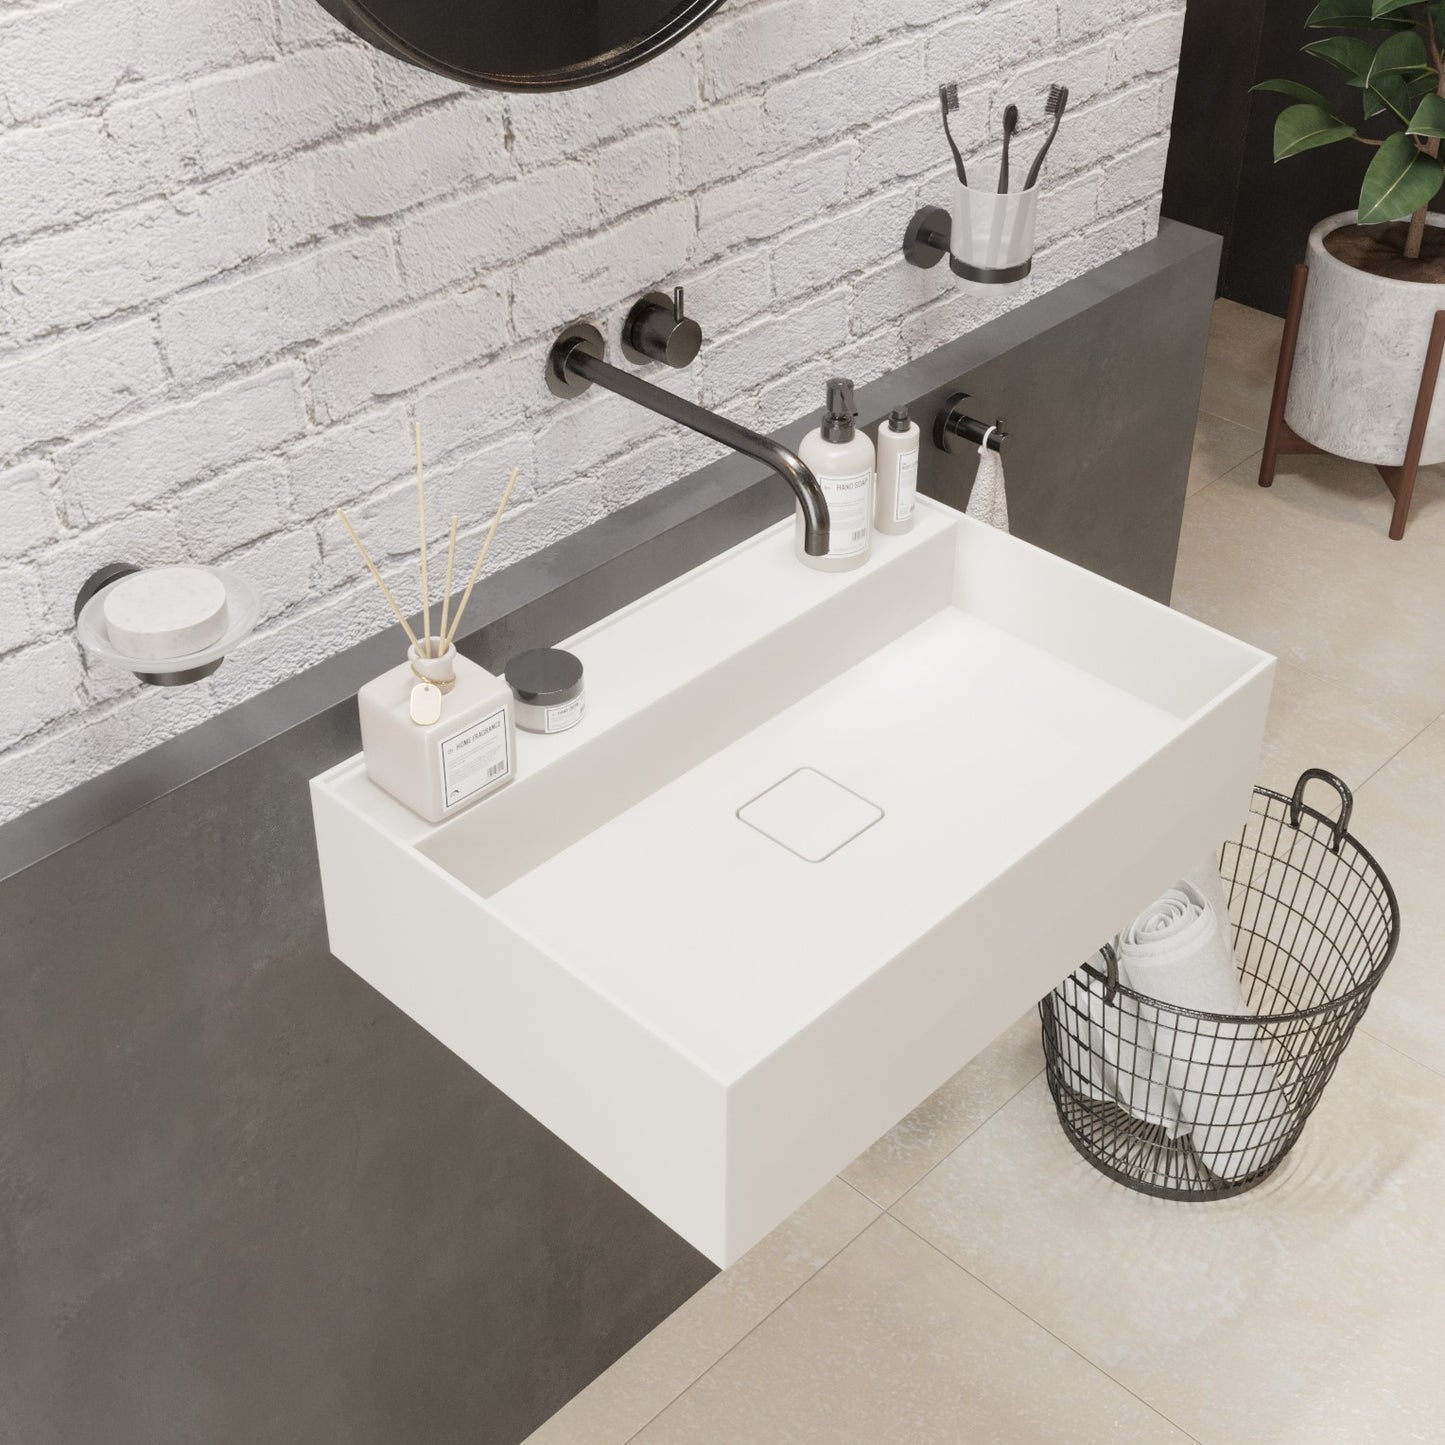 Solidbliss 24" Wall Mounted Washbasin With Shelf at the Rear.